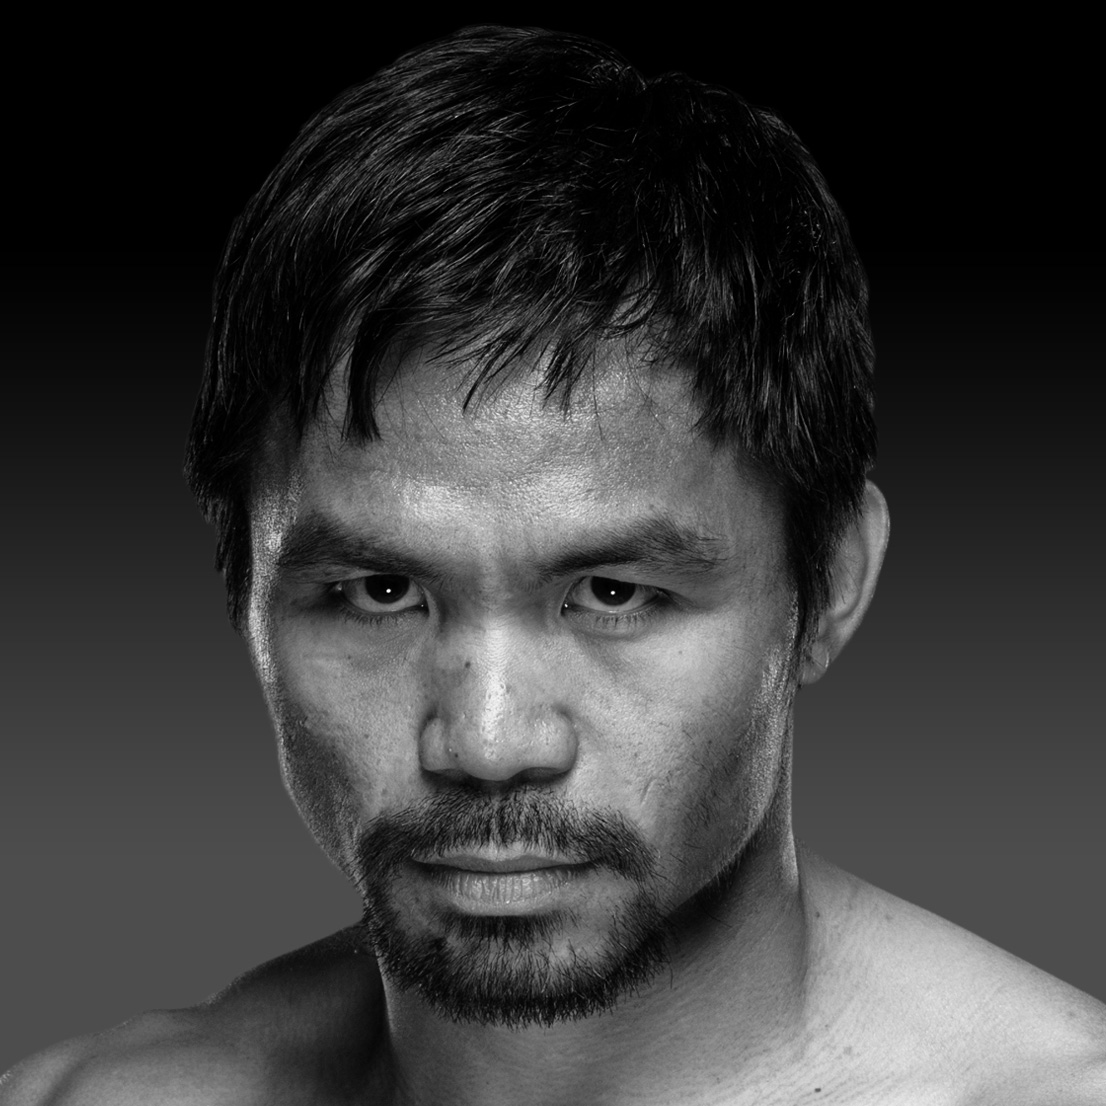 Who Should Manny Pacquiao Fight November 10?